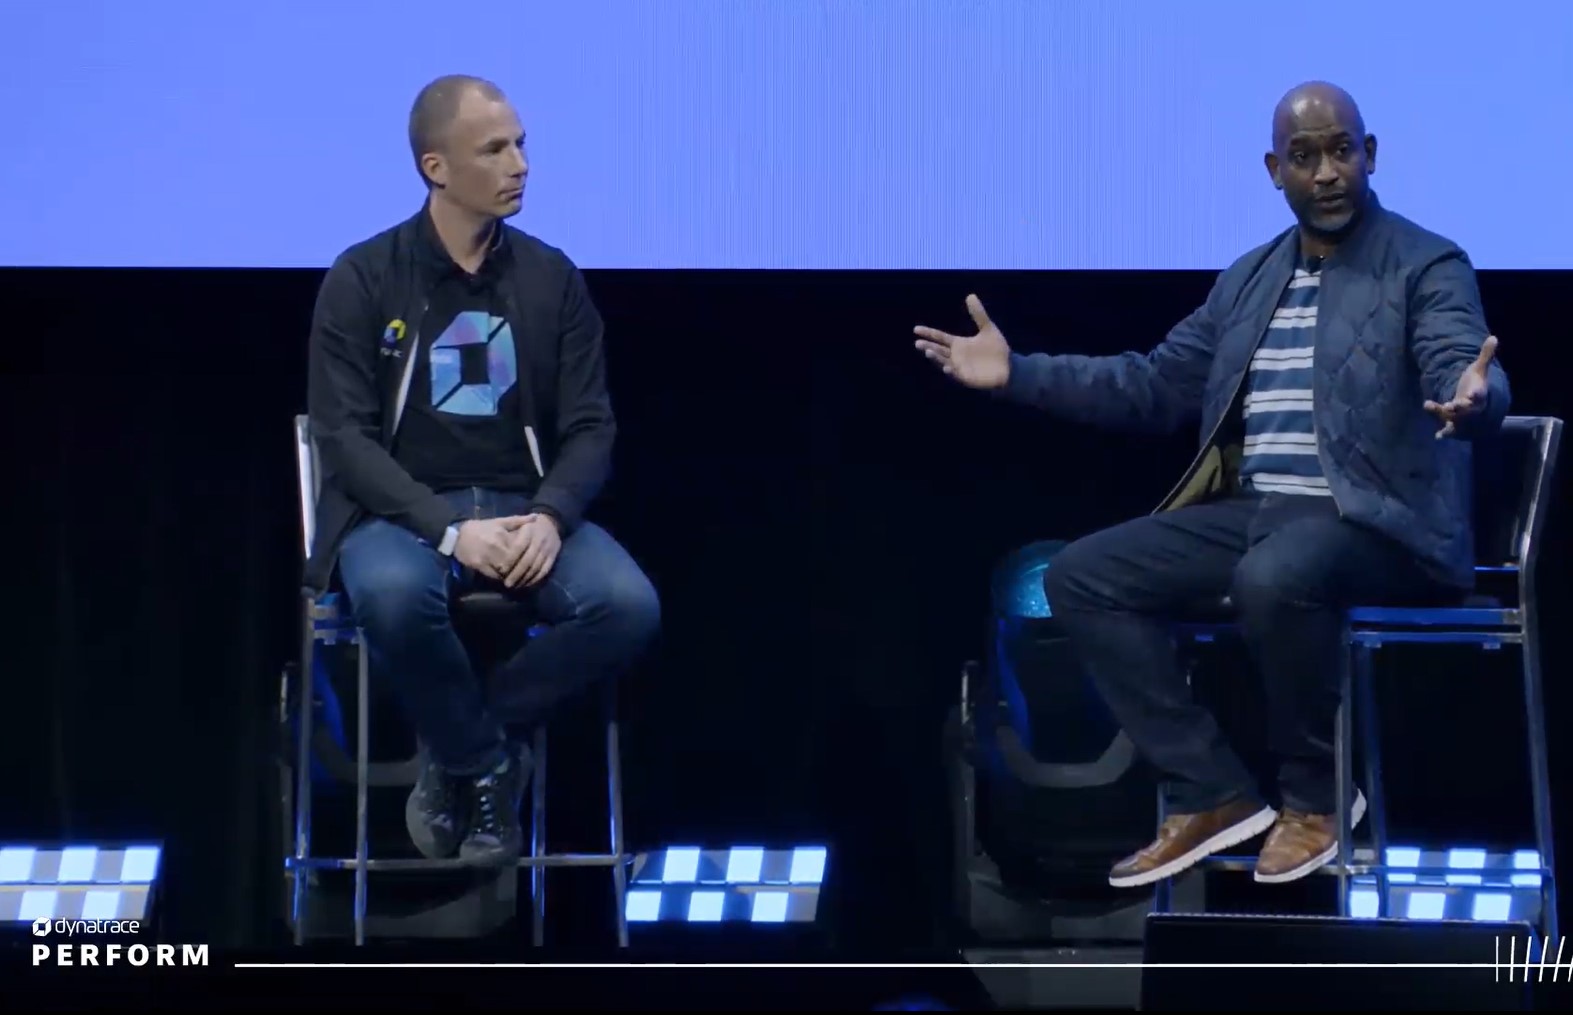 Andreas Grabner and Kelsey Hightower on stage